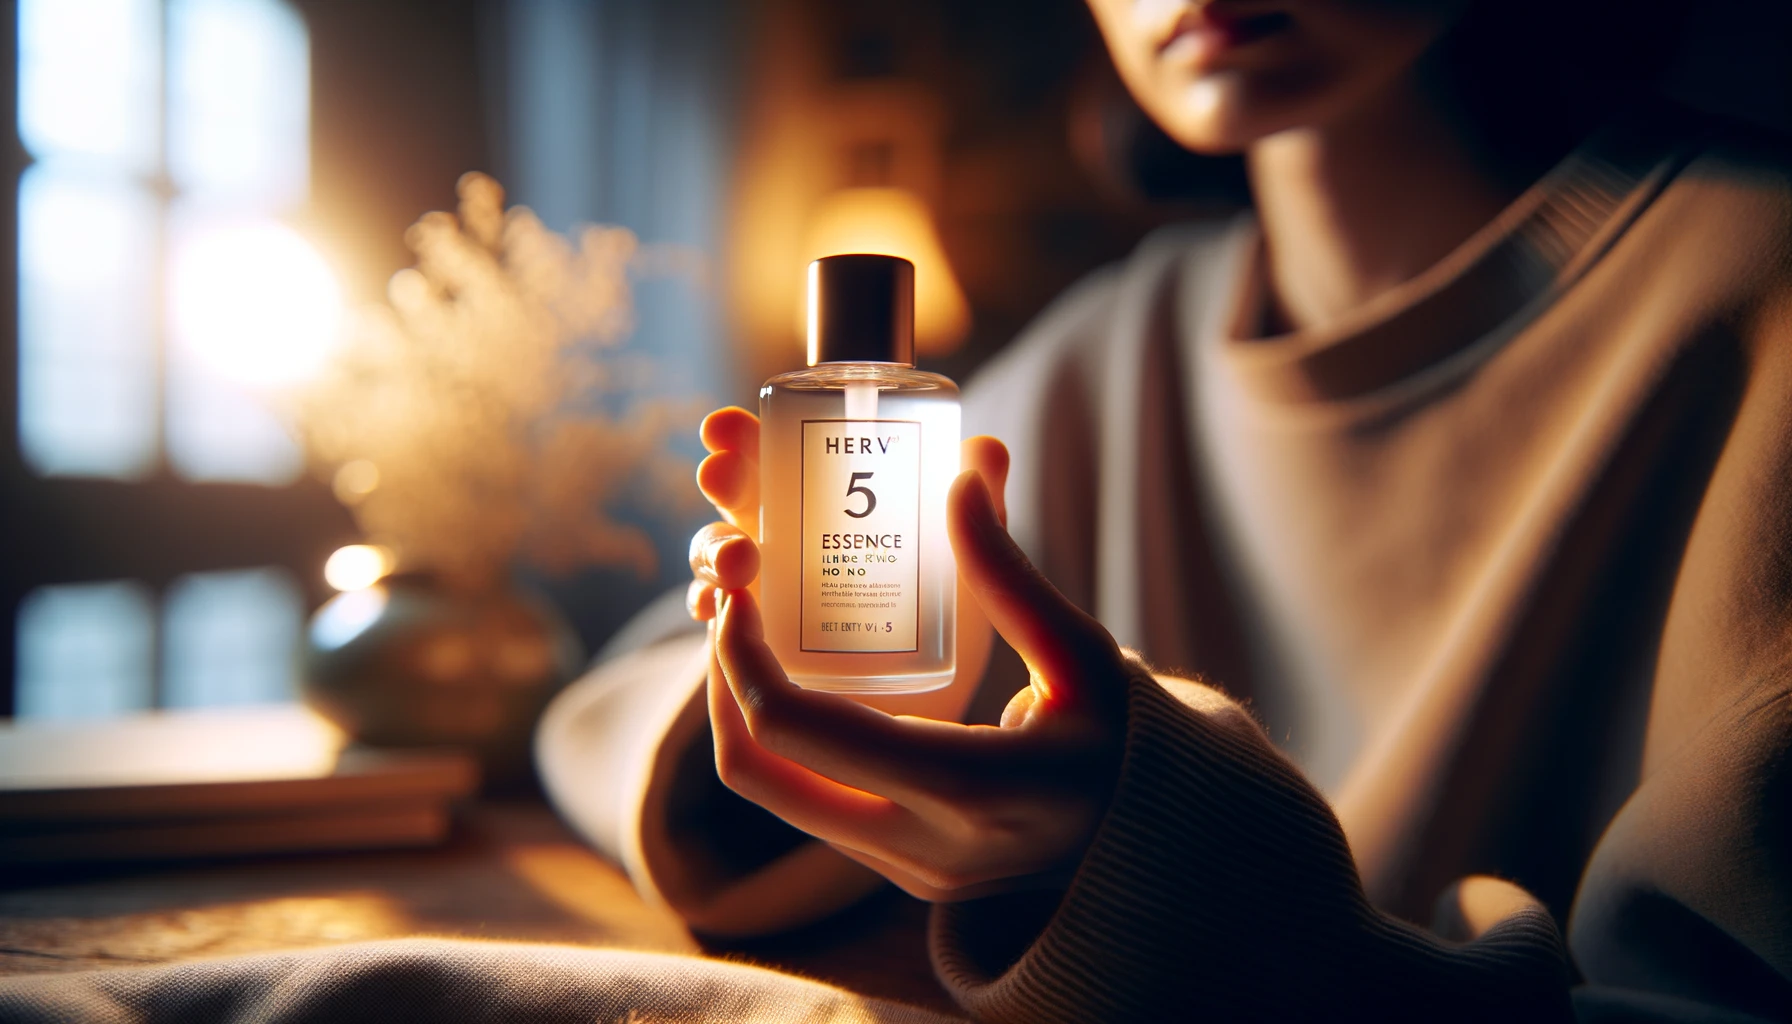 DALL·E 2024-02-18 15.52.18 - A close-up image of a person holding HERV Essence Hero No. 5 bottle gently in their hands, with focus on the product and fingers. The background is a